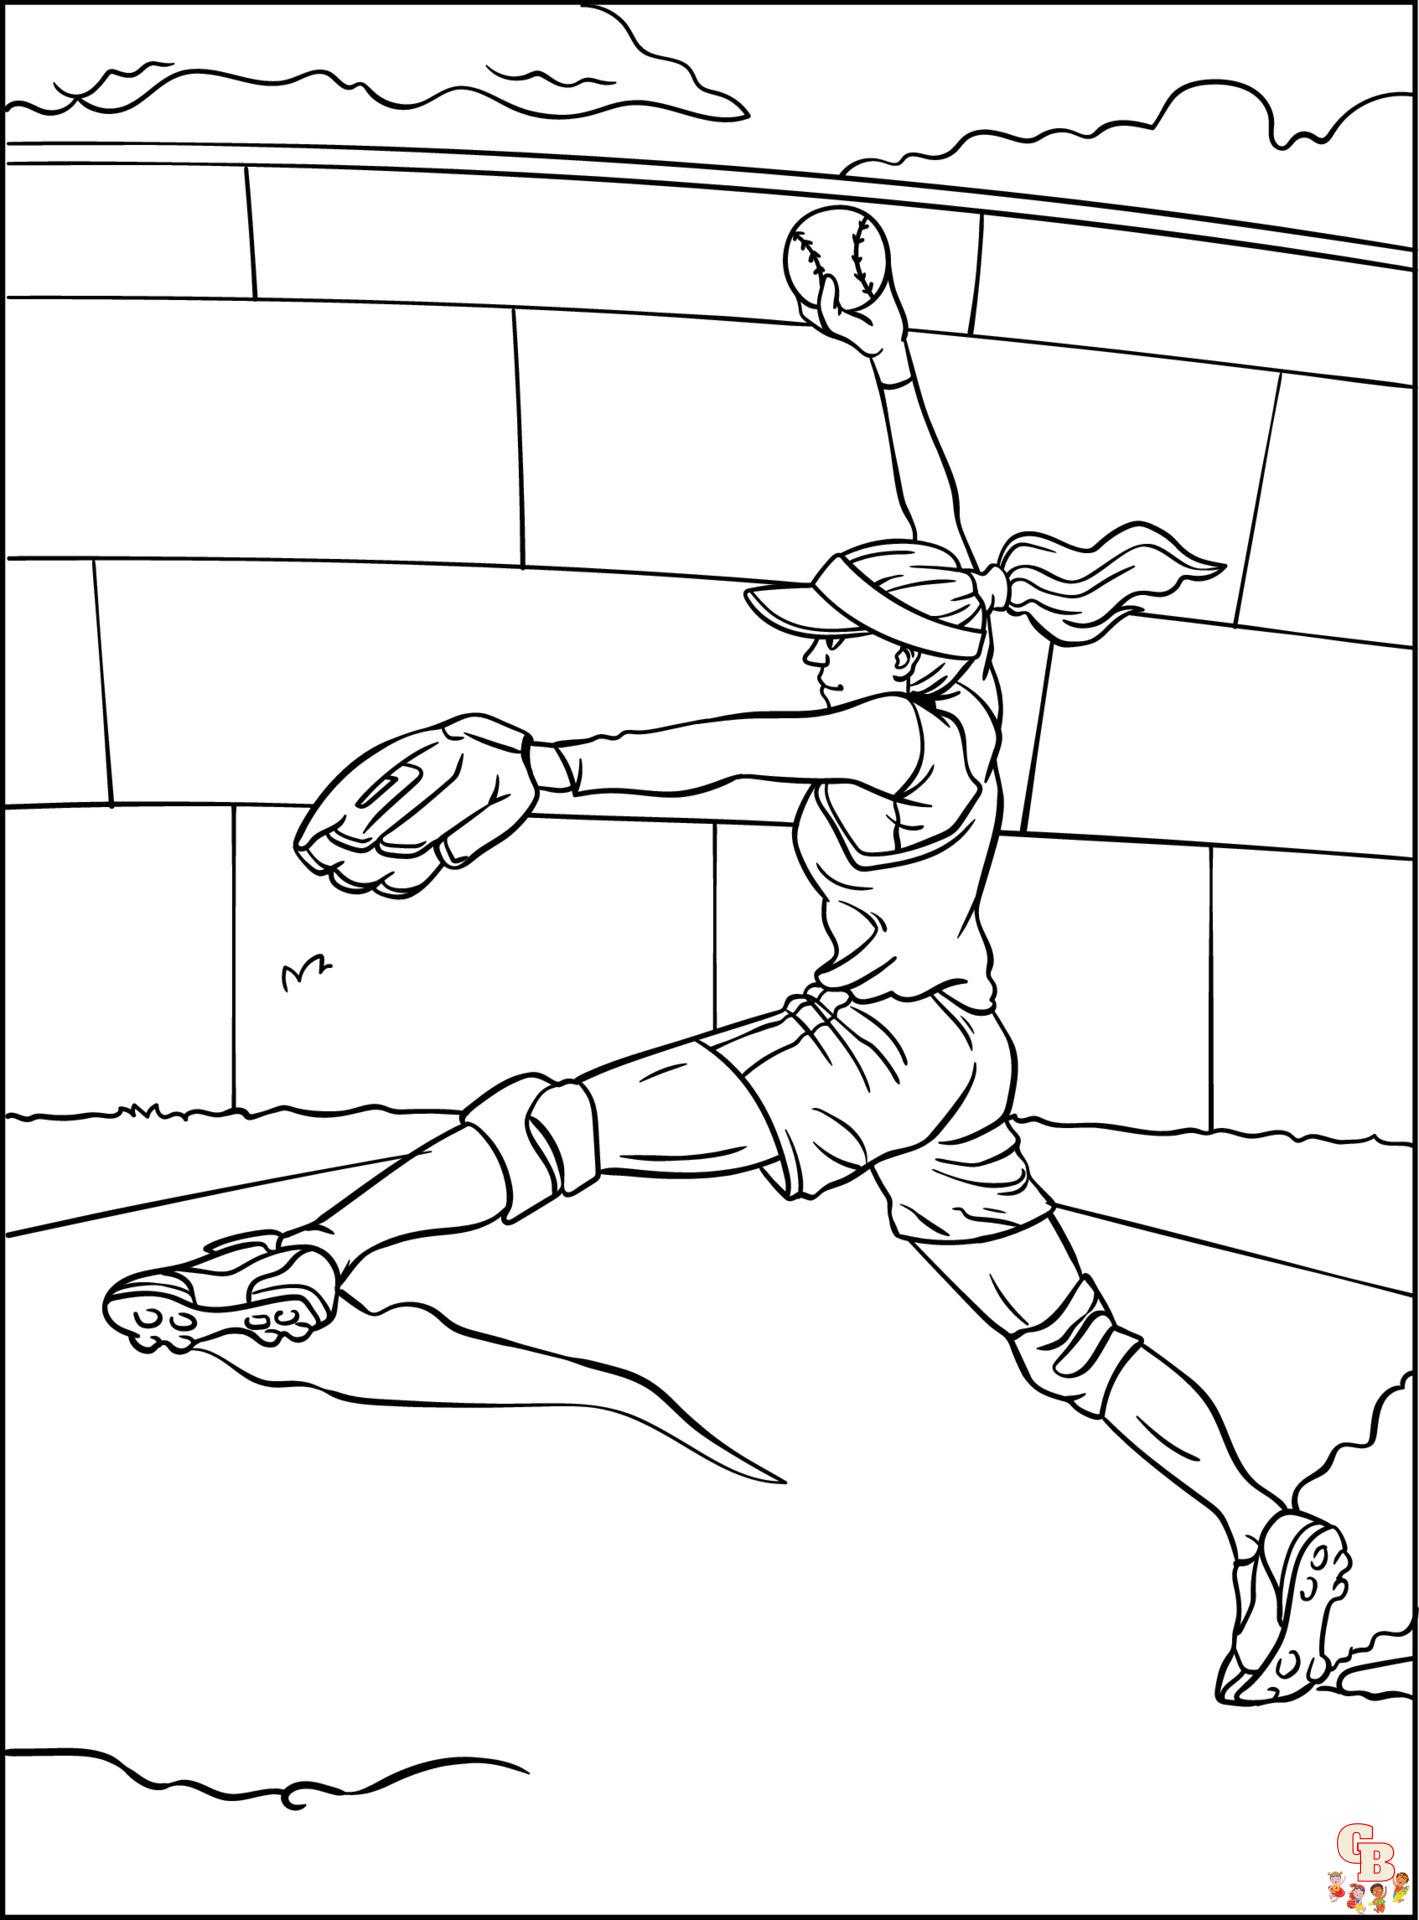 Softball Coloring Pages 3